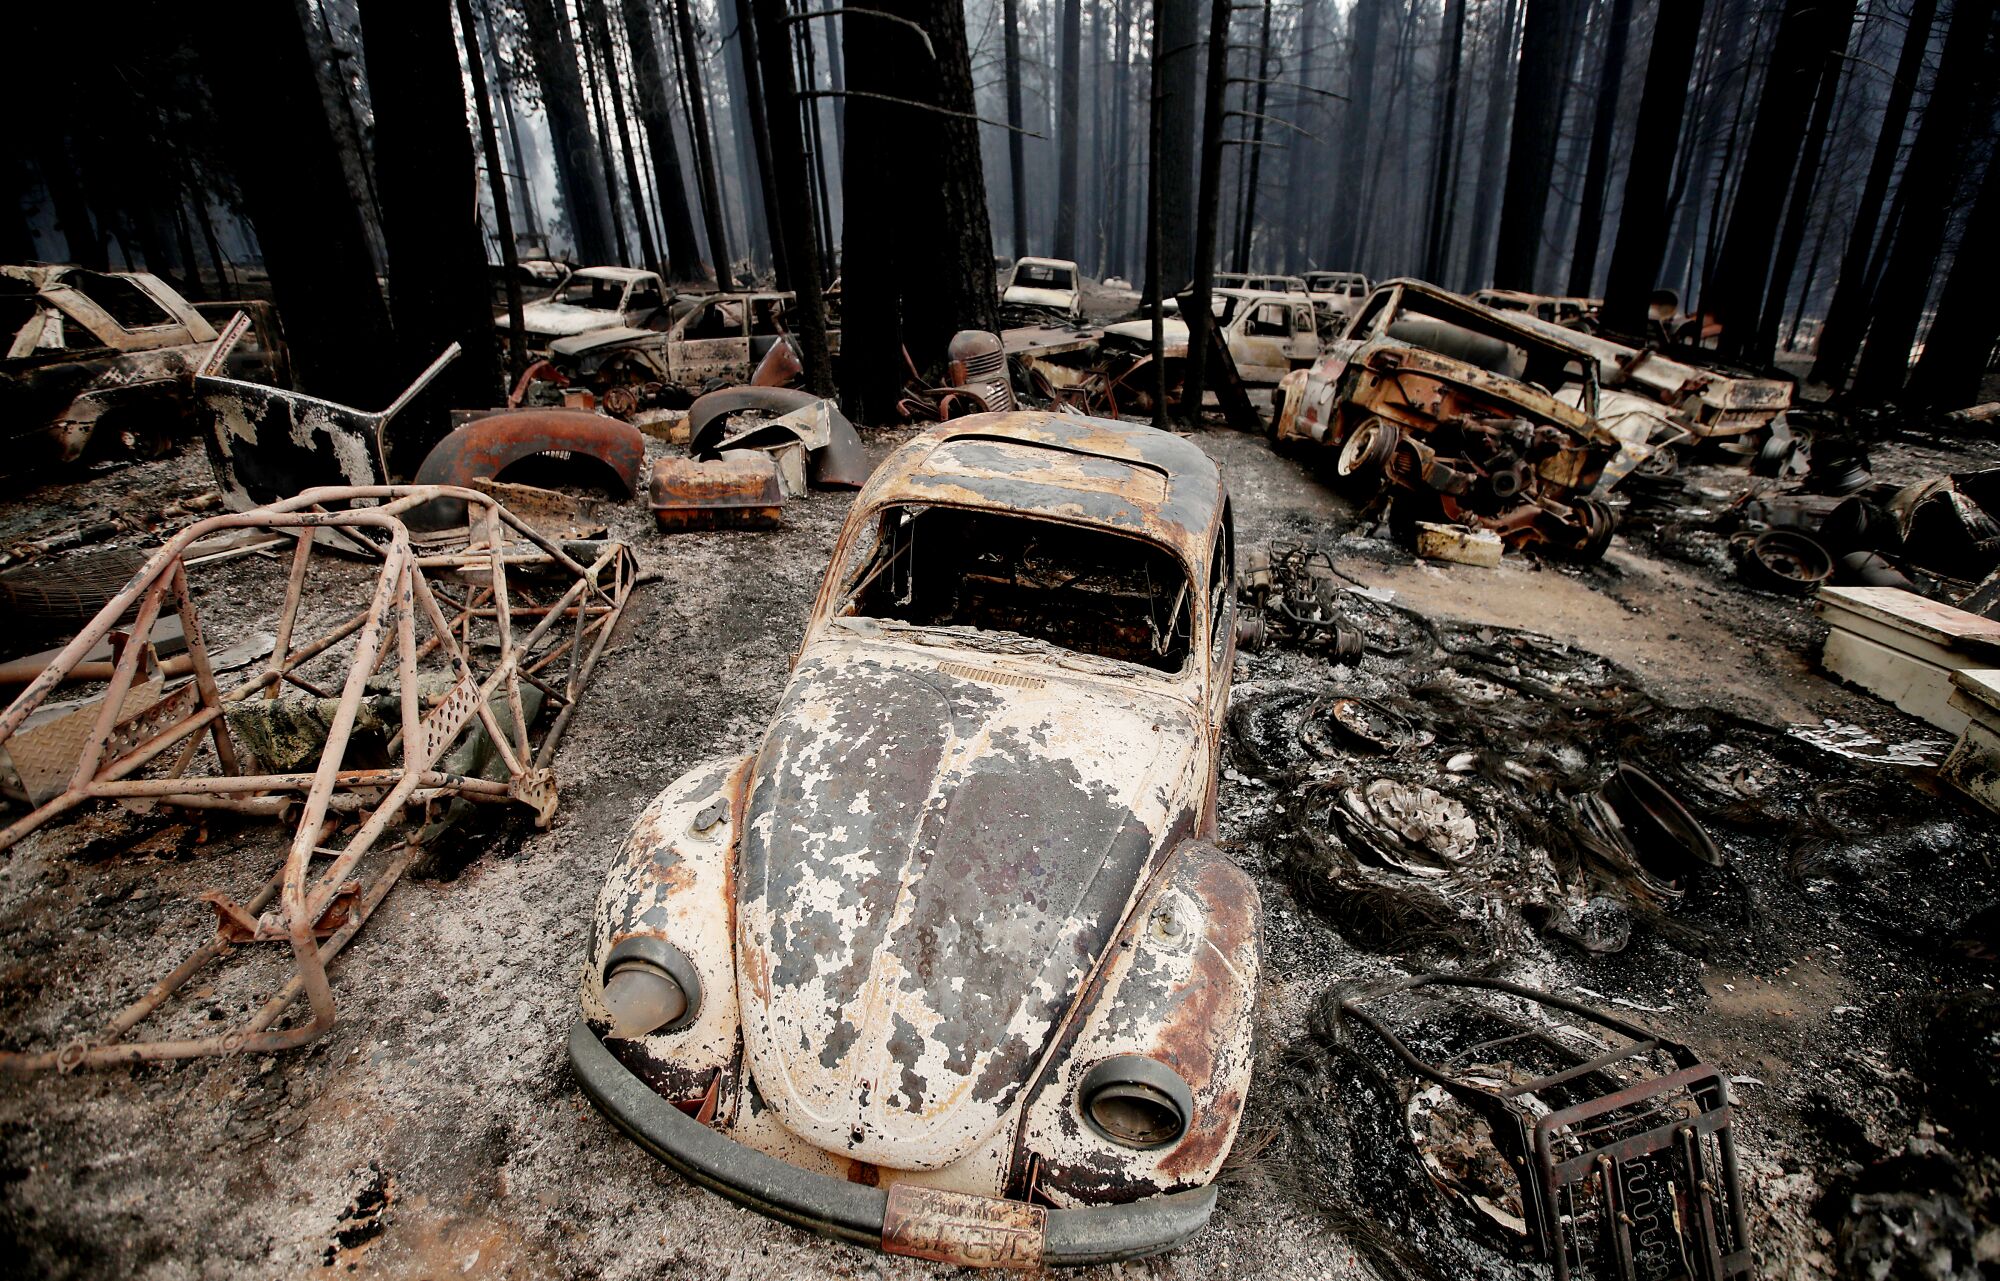 Burned vehicles and trees.